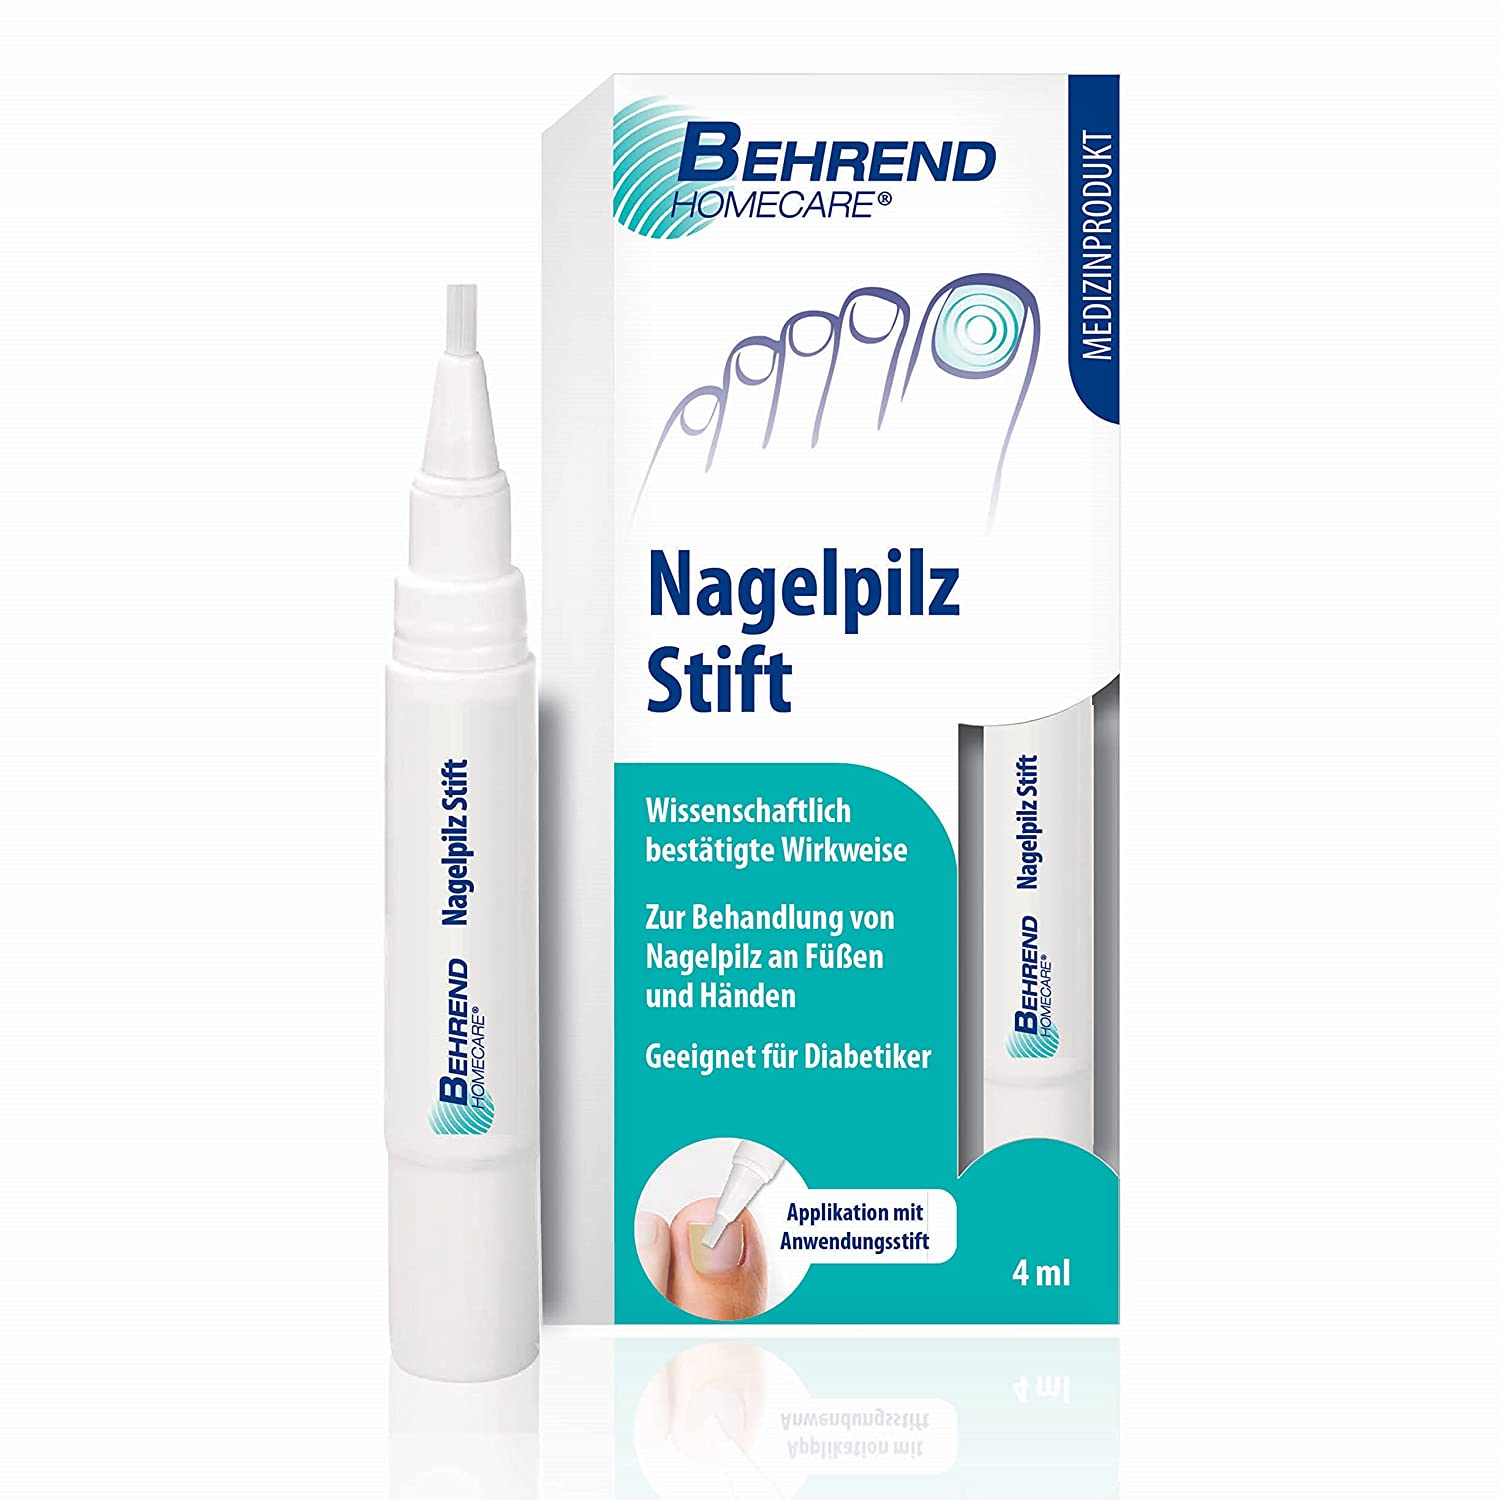 Behrend Homecare Nail fungus pen for quick nail fungus treatment for fungal infections, nail fungus varnish for fingernails and toenails, medical device with scientifically proven effect